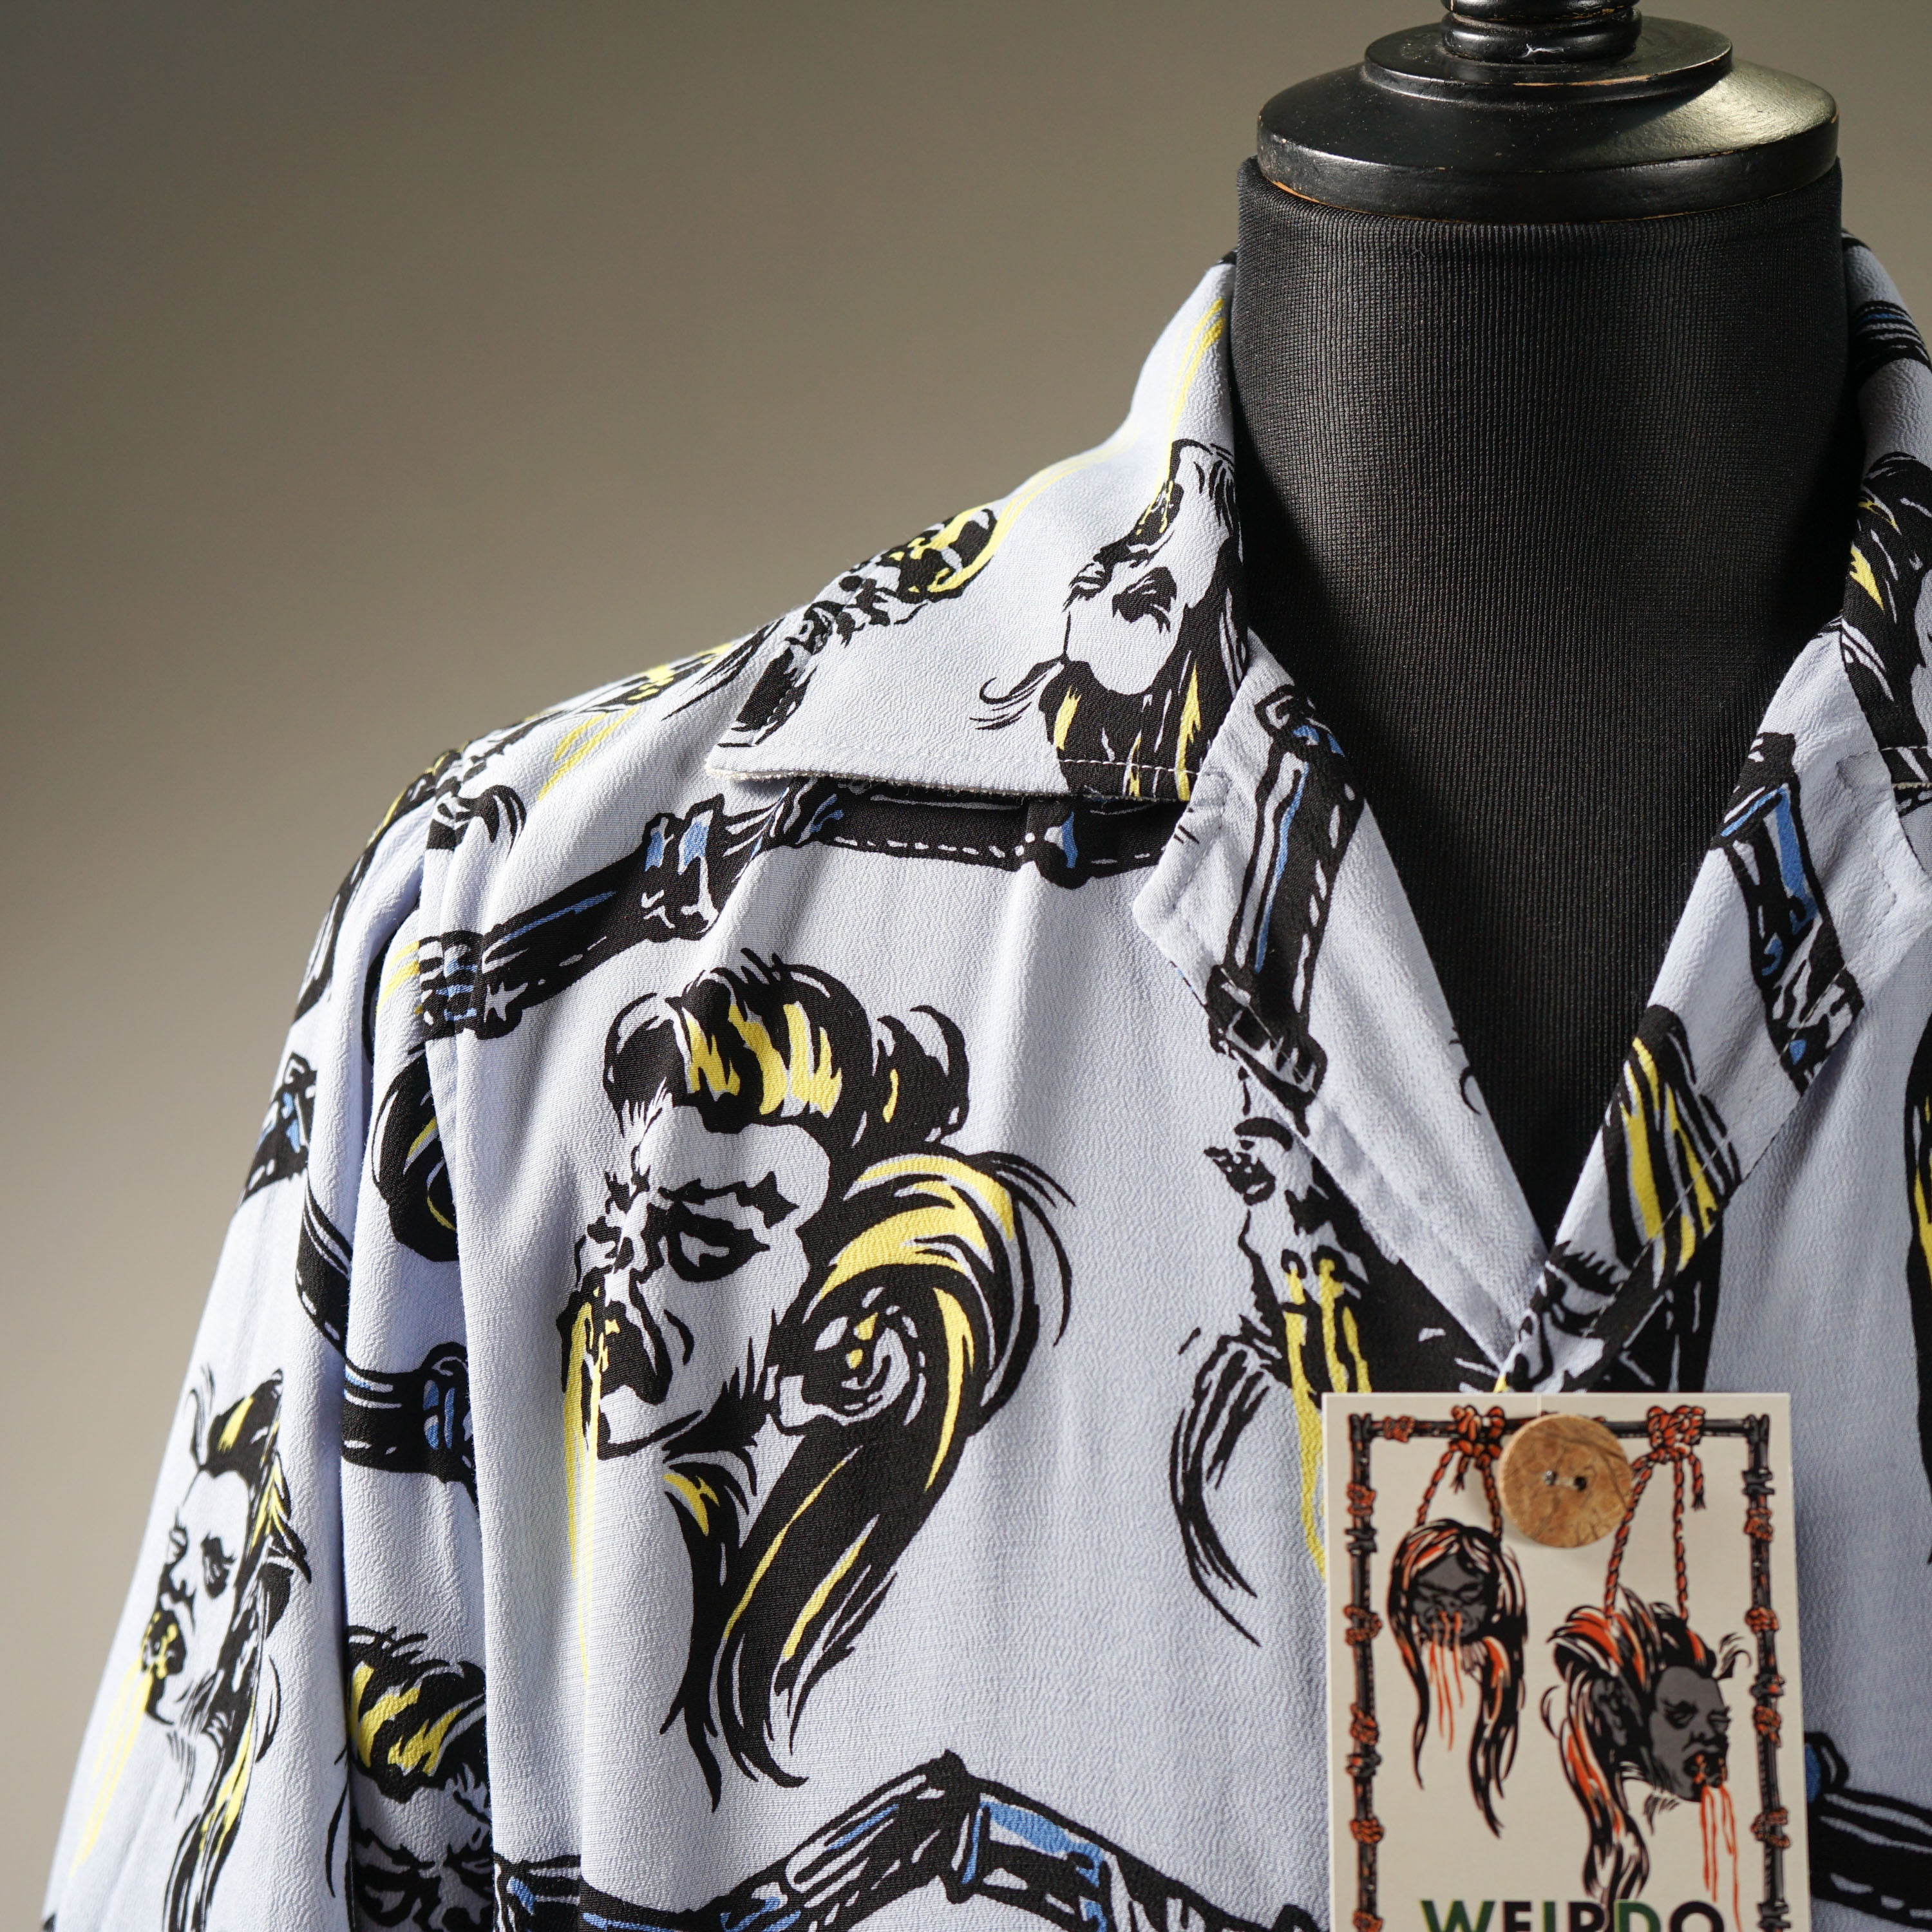 VOODOO HEAD - S/S BEACH SHIRTS / WRD-23-SS-08 – GLADHAND & Co.